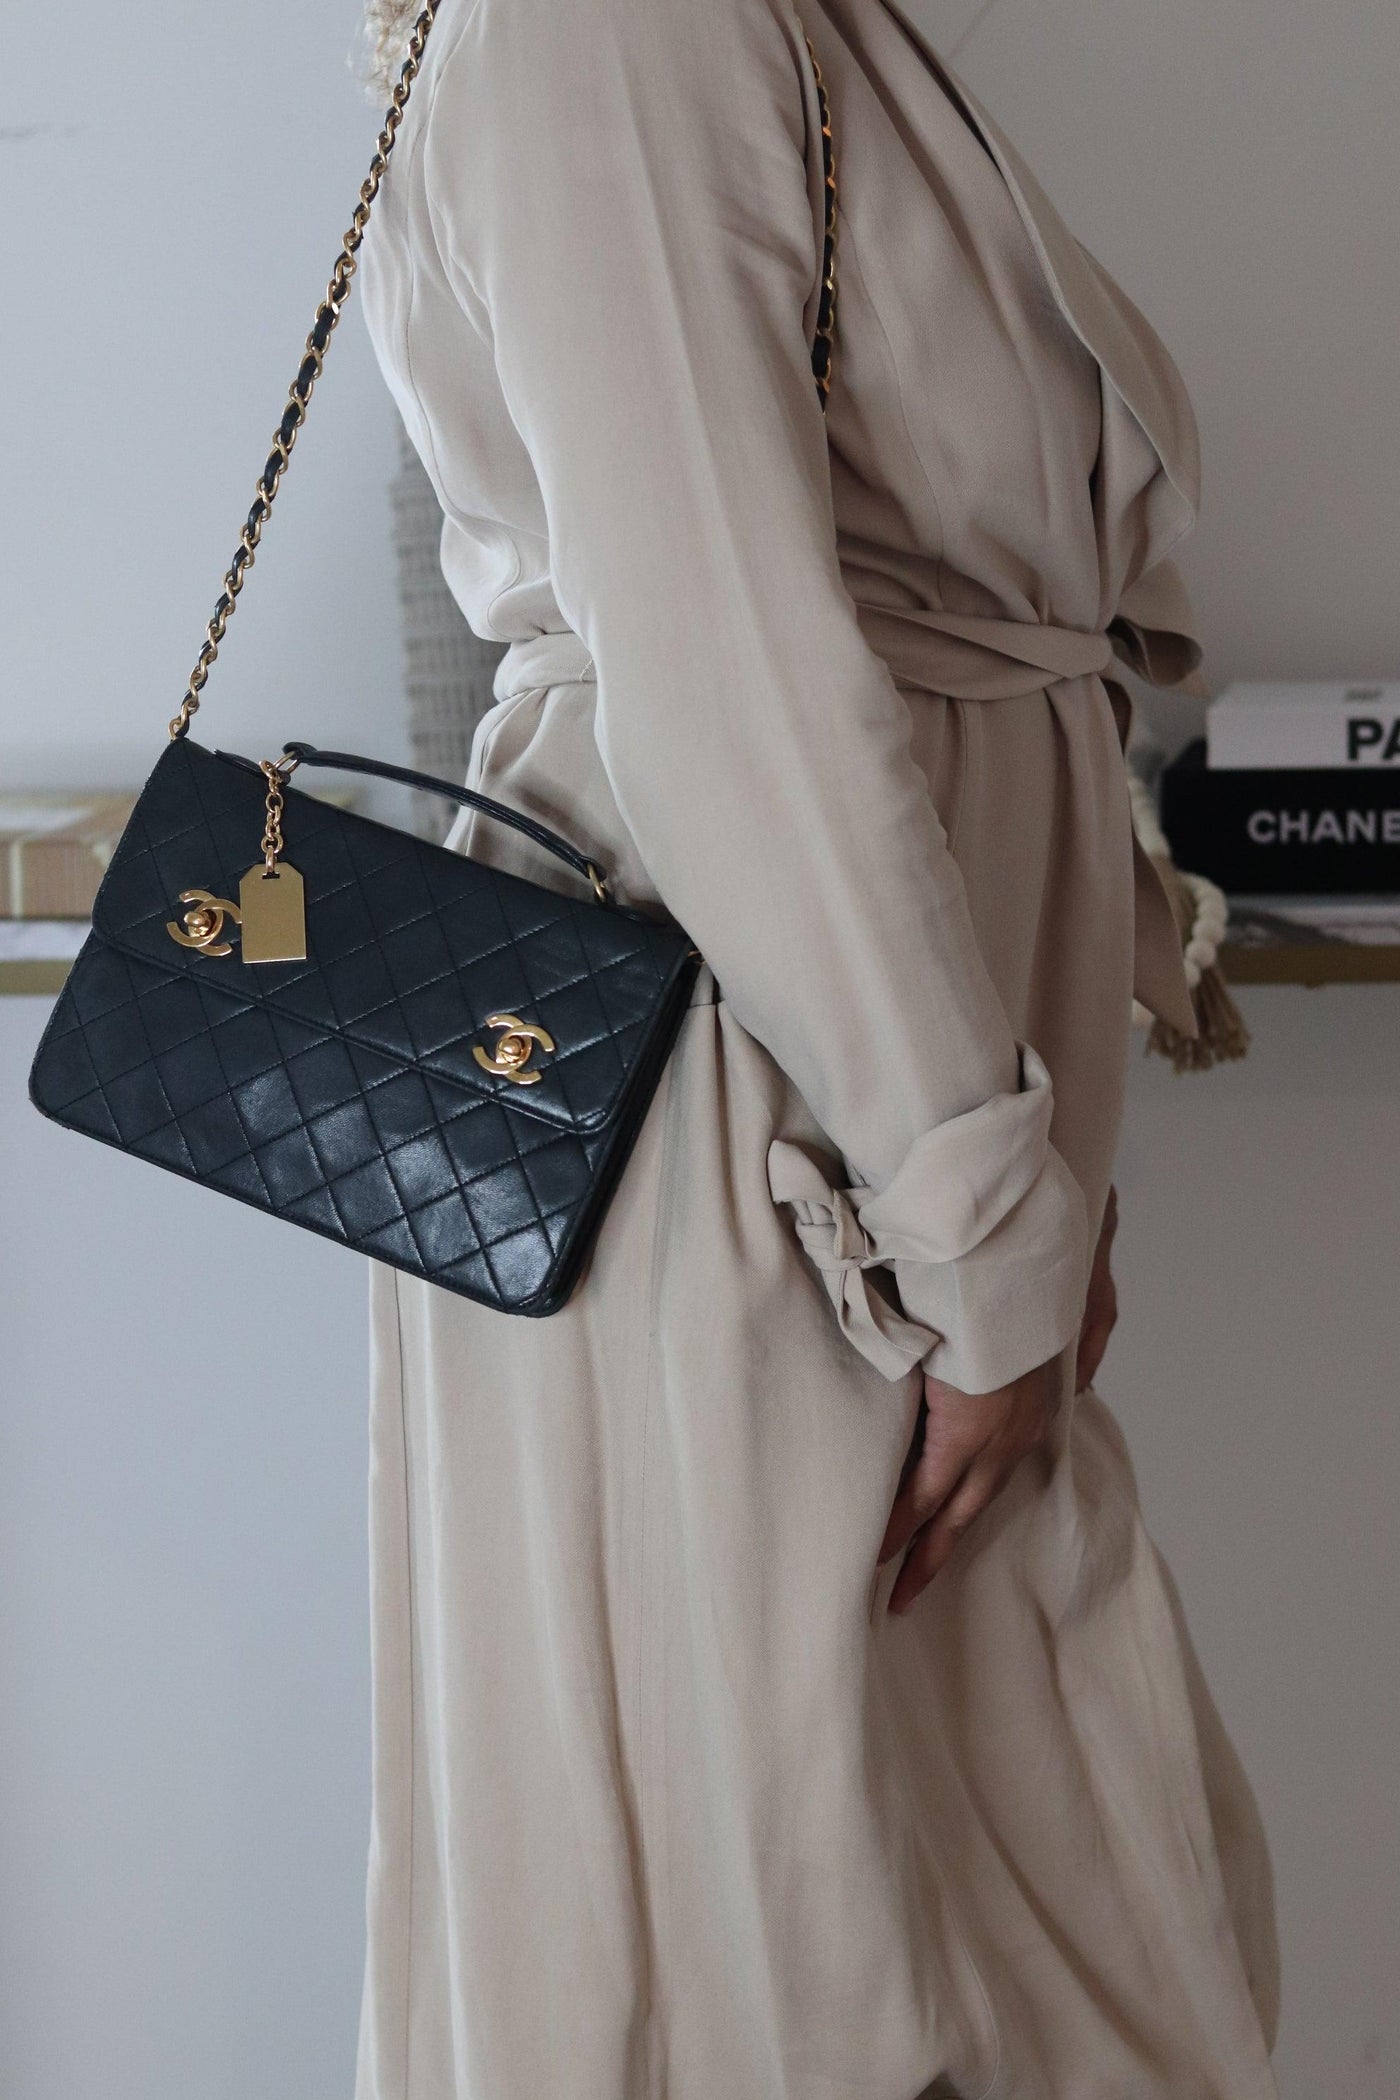 Chanel Vintage Mini Quilted Crossbody Bag, $3,993